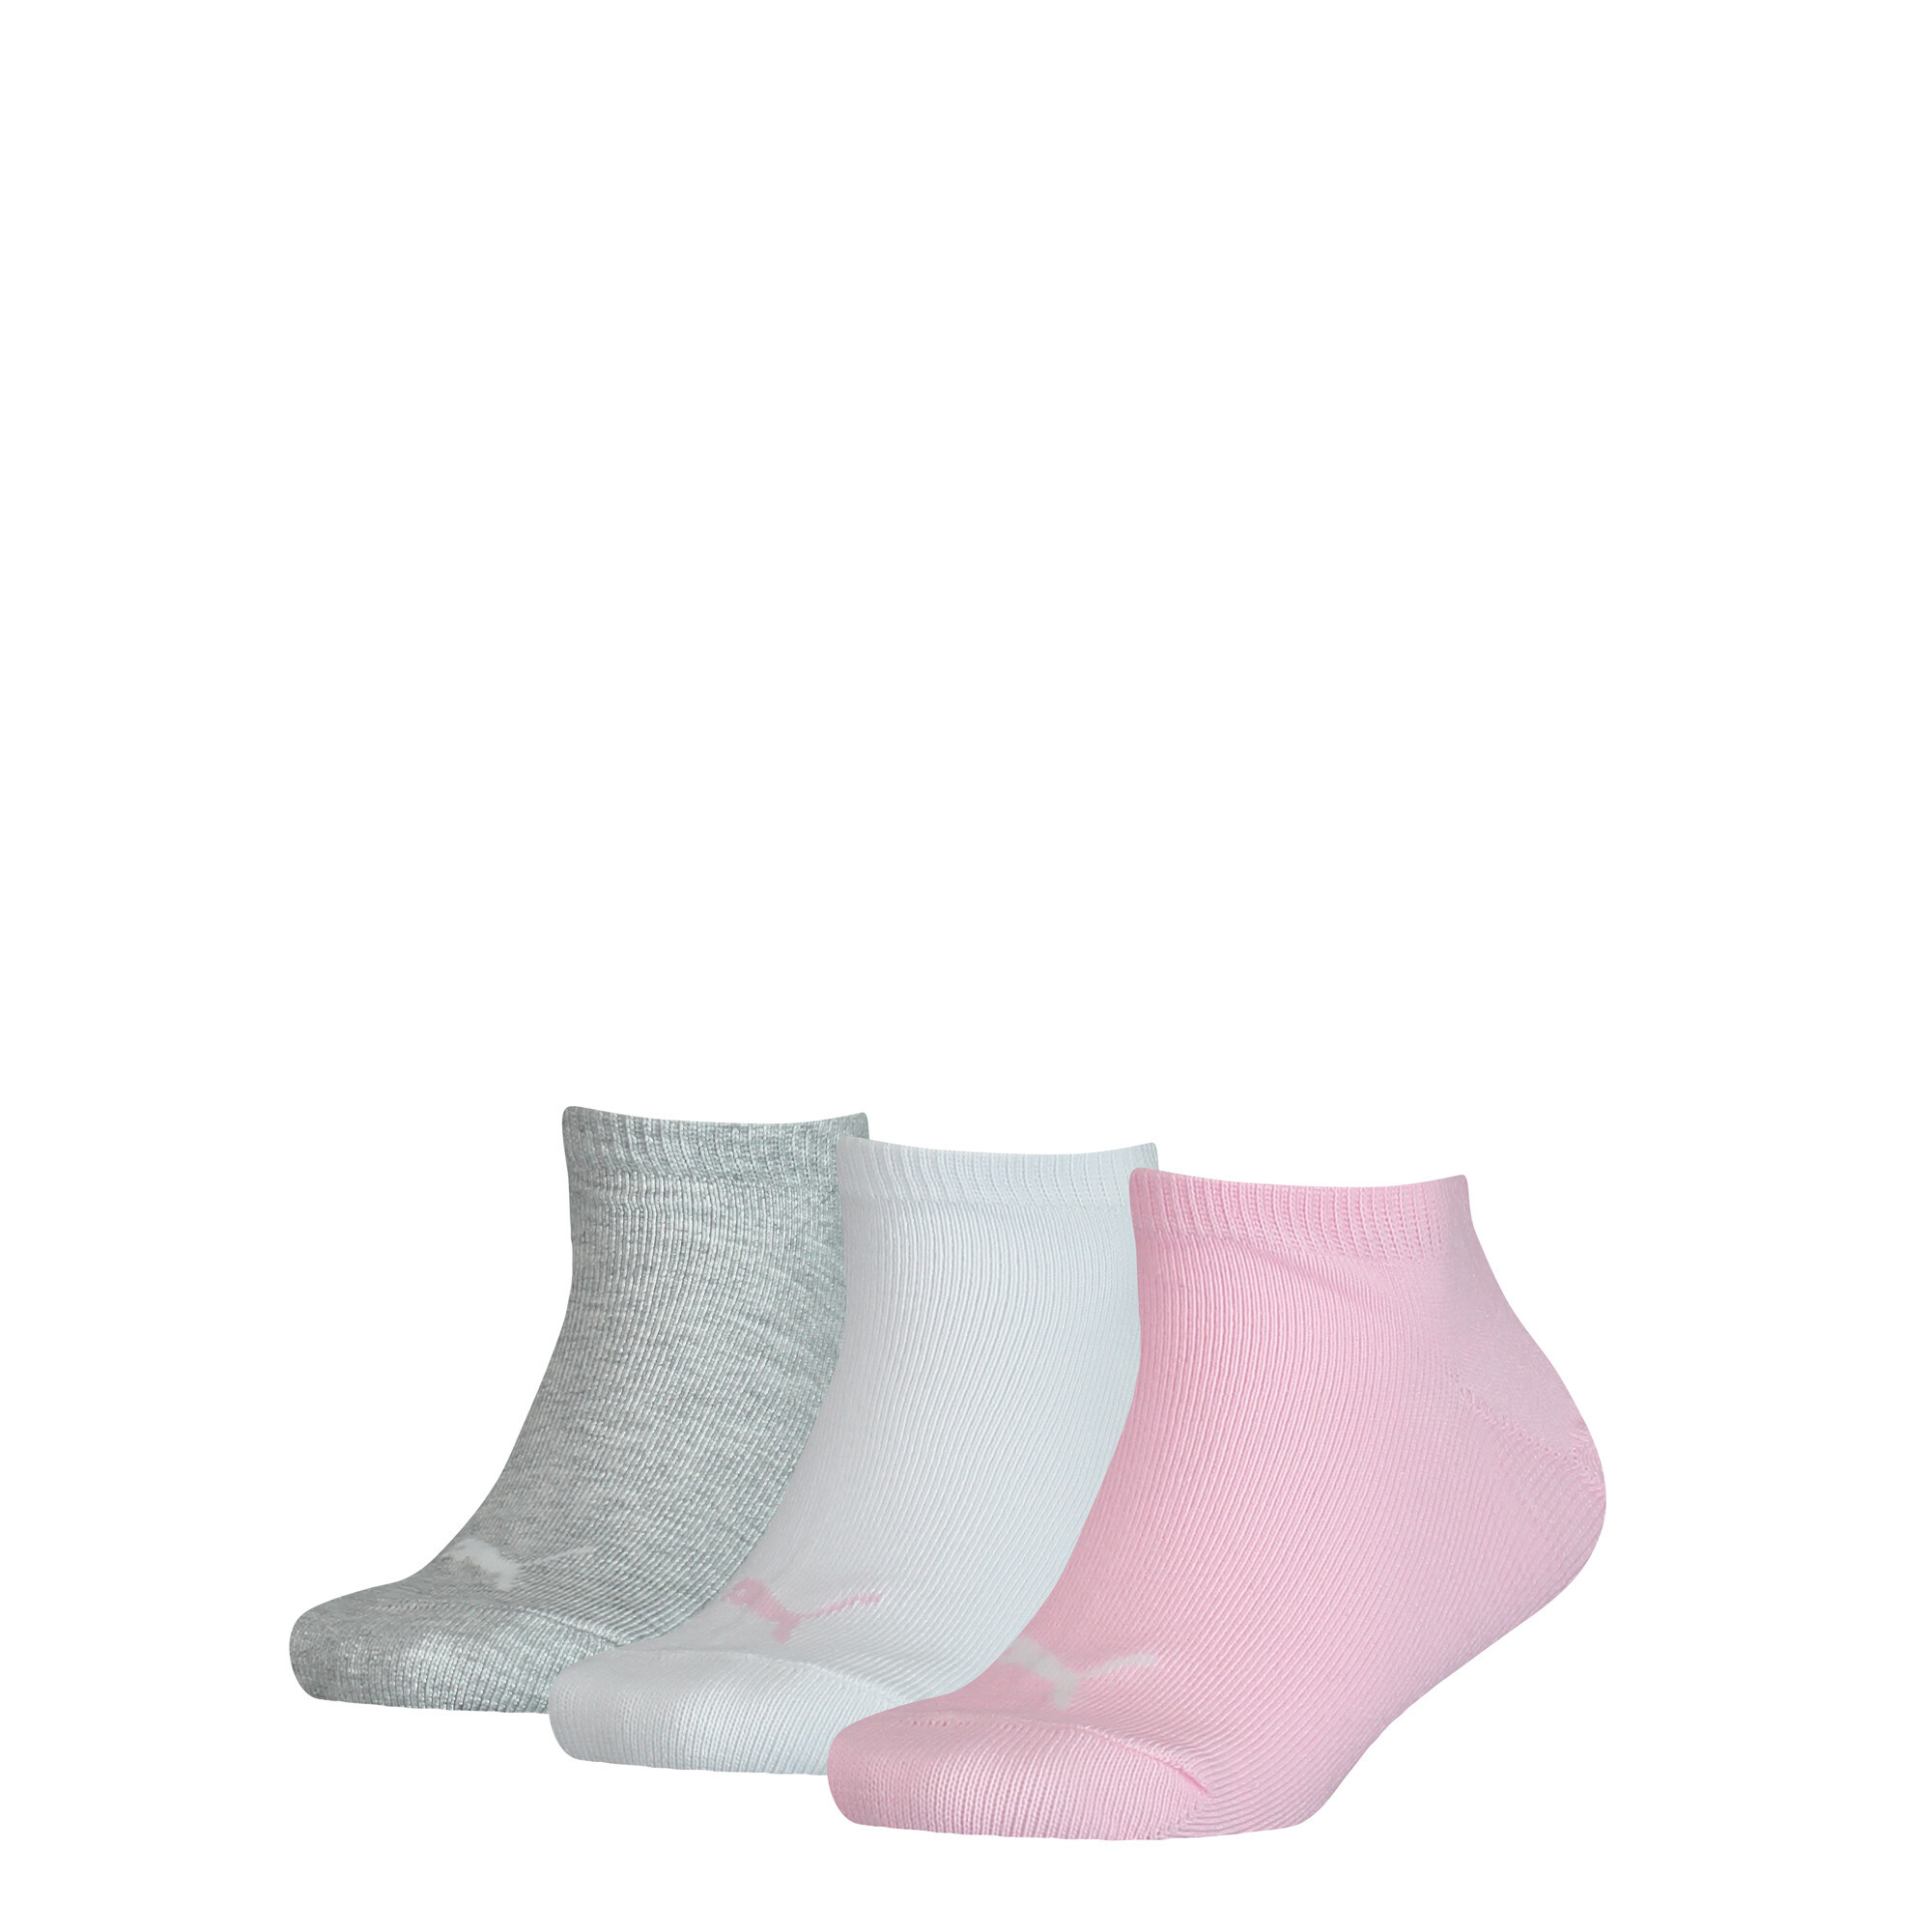 Kids' PUMA Invisible Socks 3 Pack In Rose Water, Size 27-30